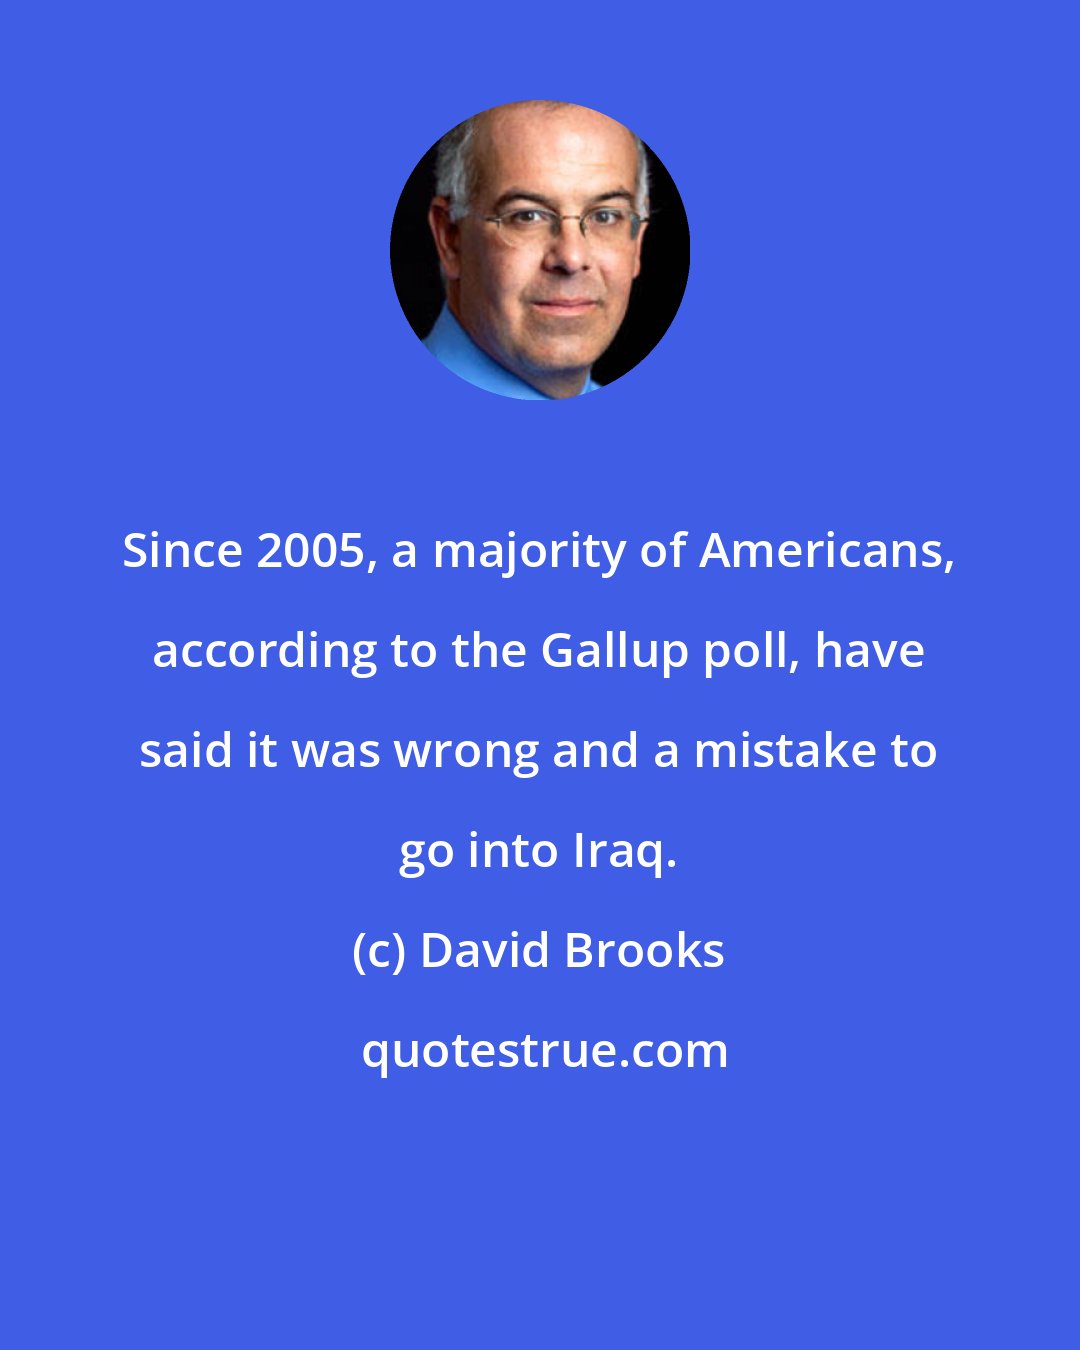 David Brooks: Since 2005, a majority of Americans, according to the Gallup poll, have said it was wrong and a mistake to go into Iraq.